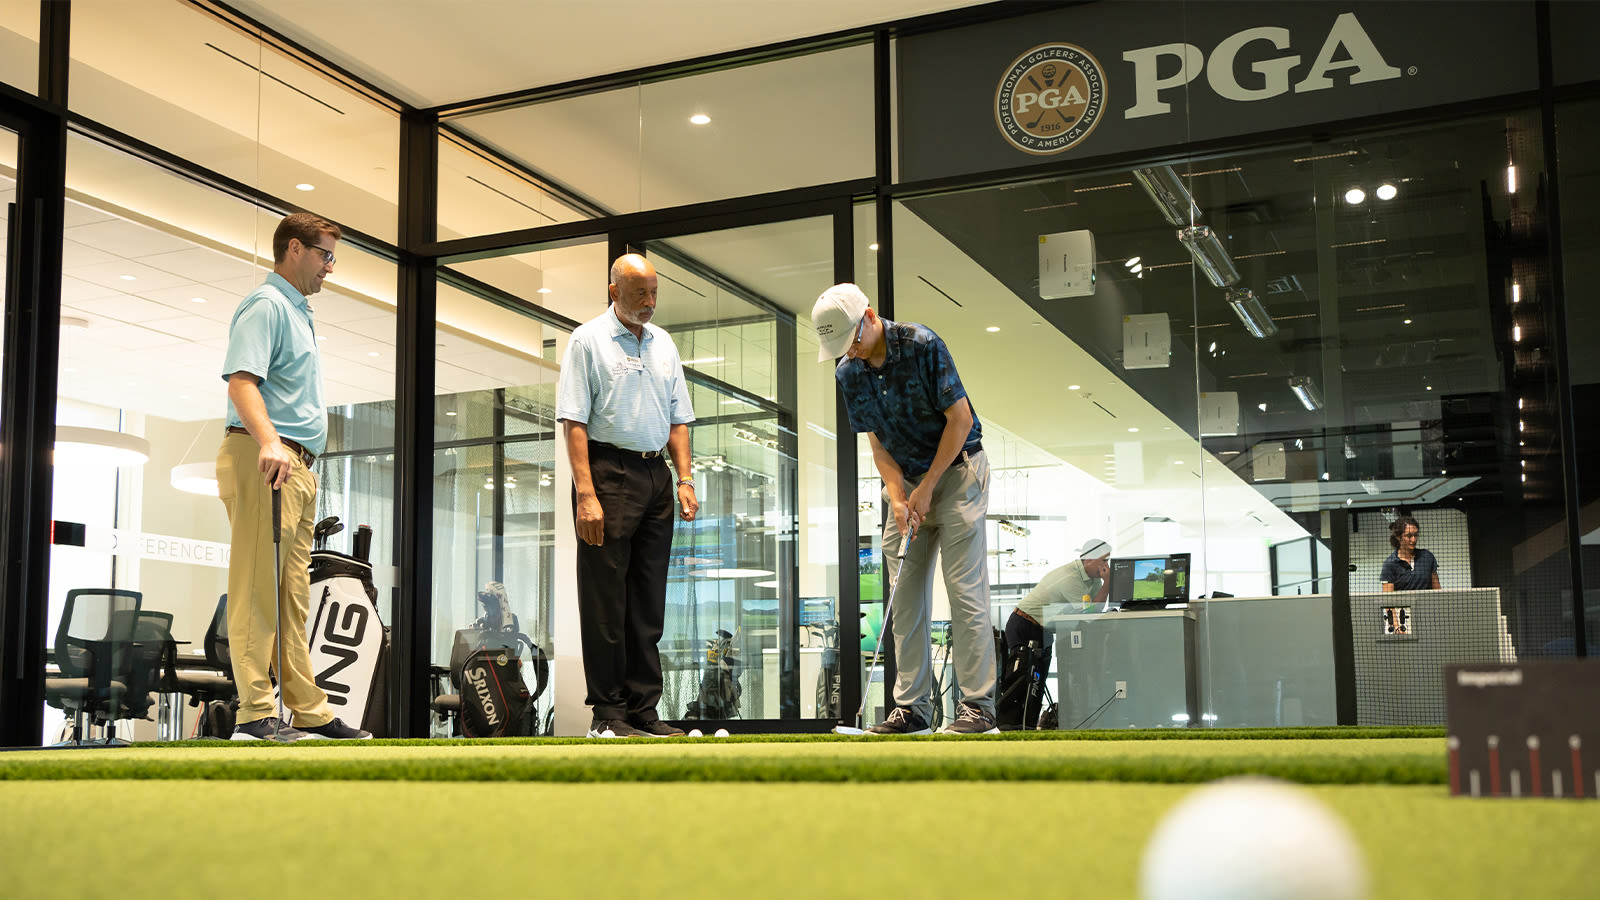 The putting green inside of the PGA Frisco Campus on August 17, 2022 in Frisco, Texas. (Photo by The Mamones LLC/PGA of America)